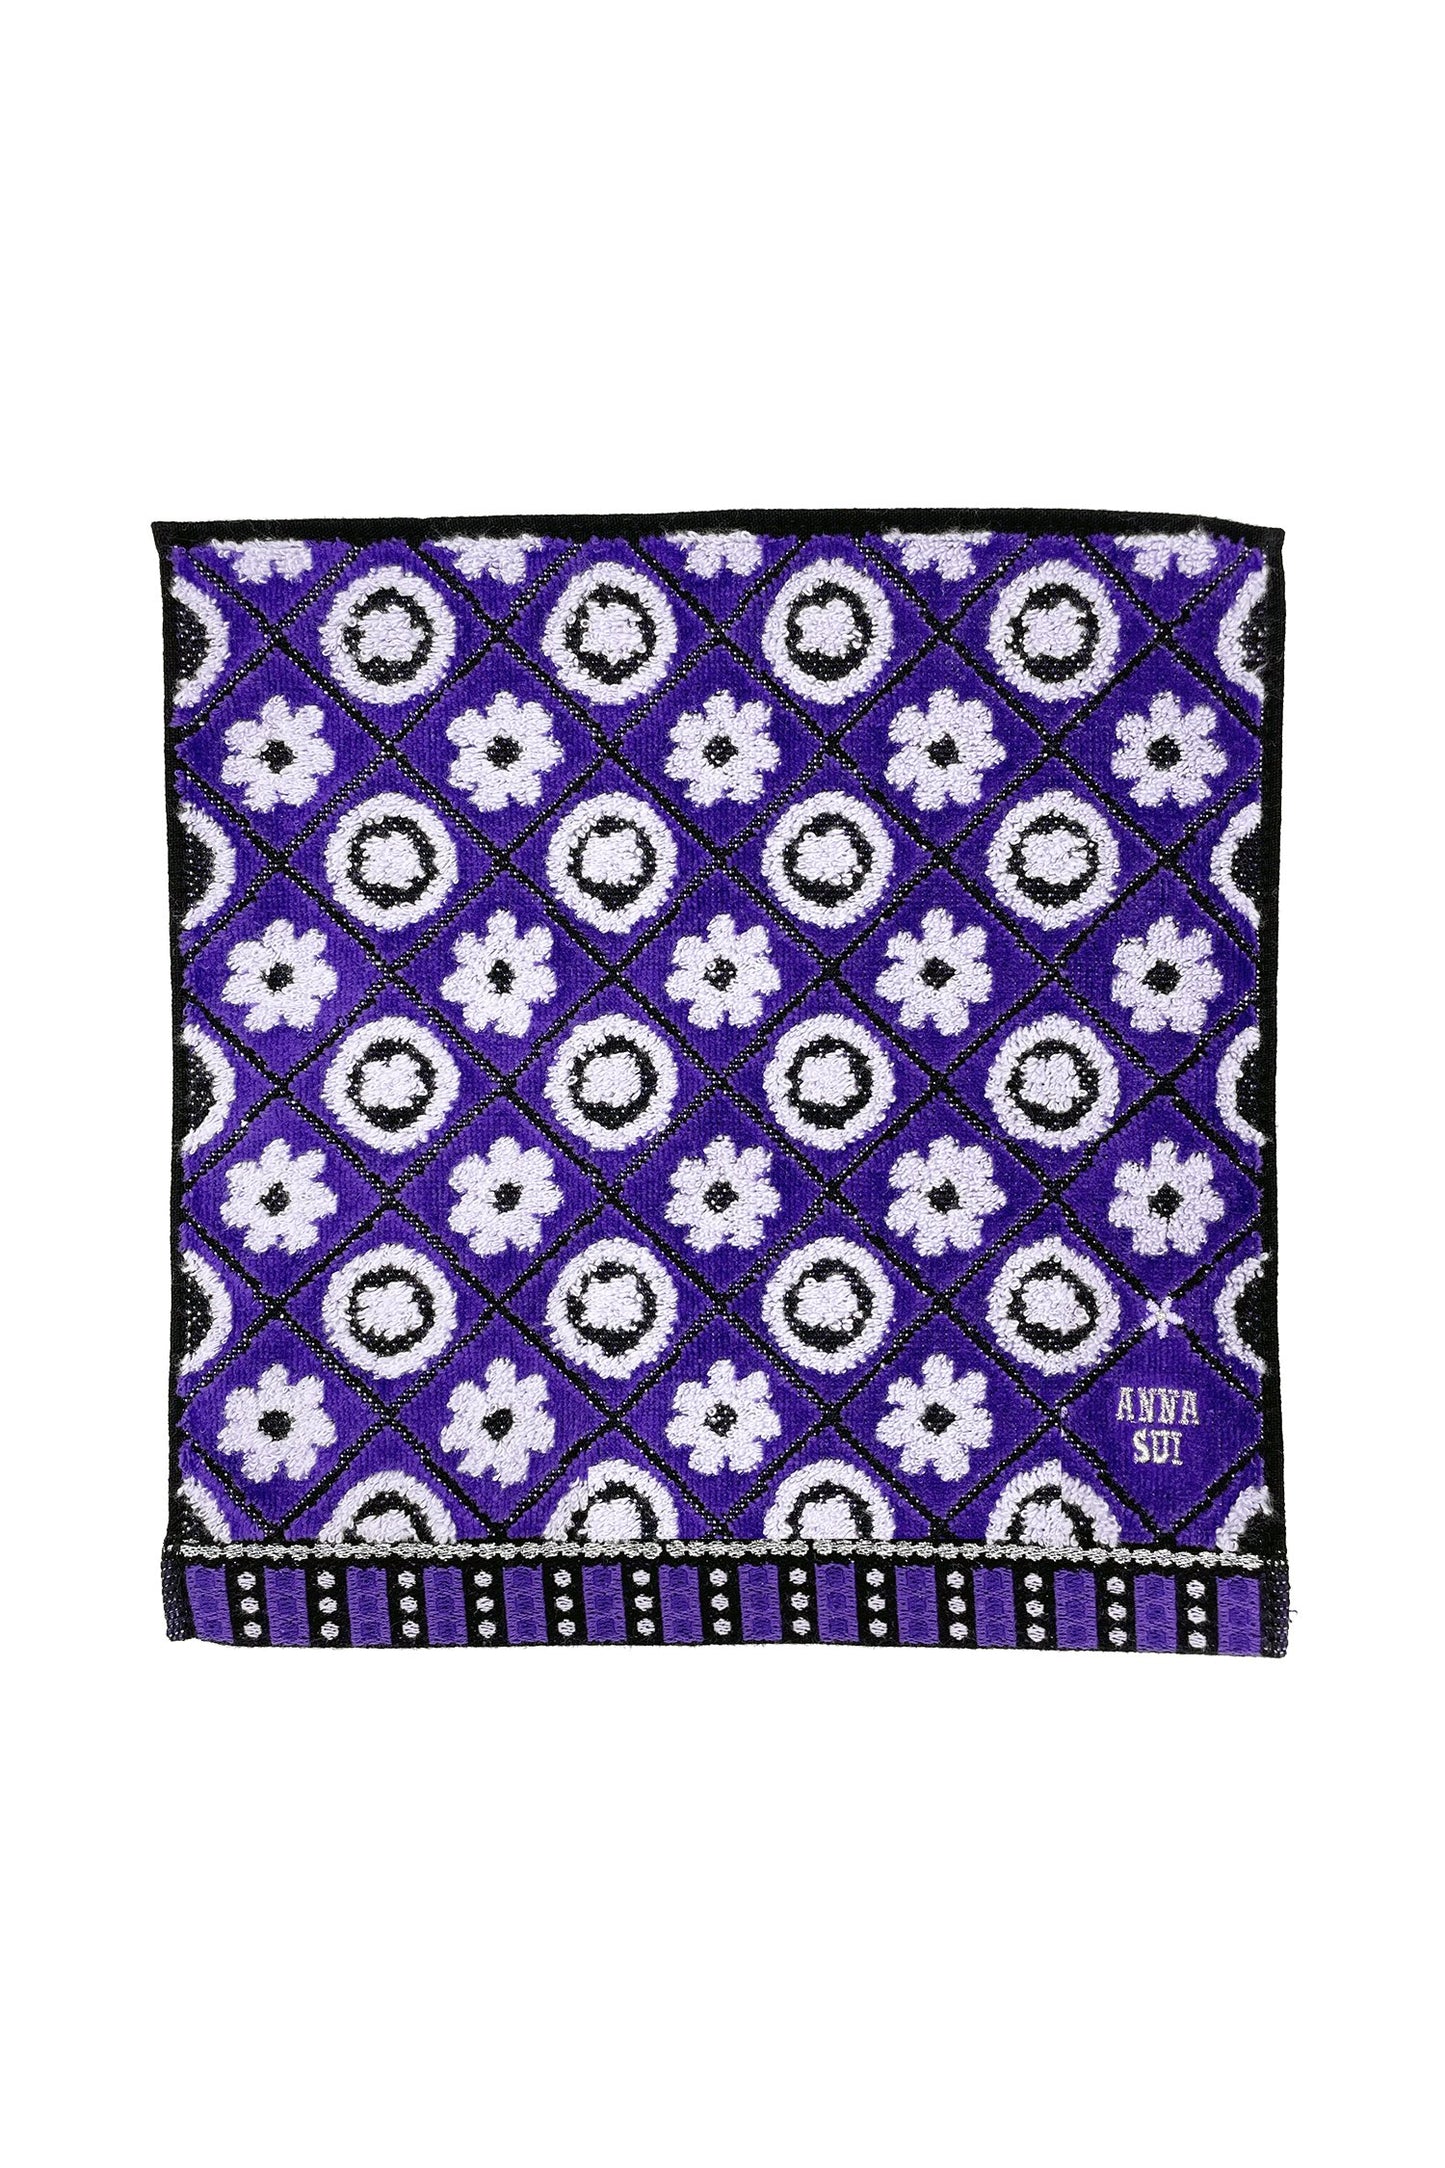 Washcloth blue with print Floral Lattice in white, black lines to highlight the diamonds, Anna Sui's label